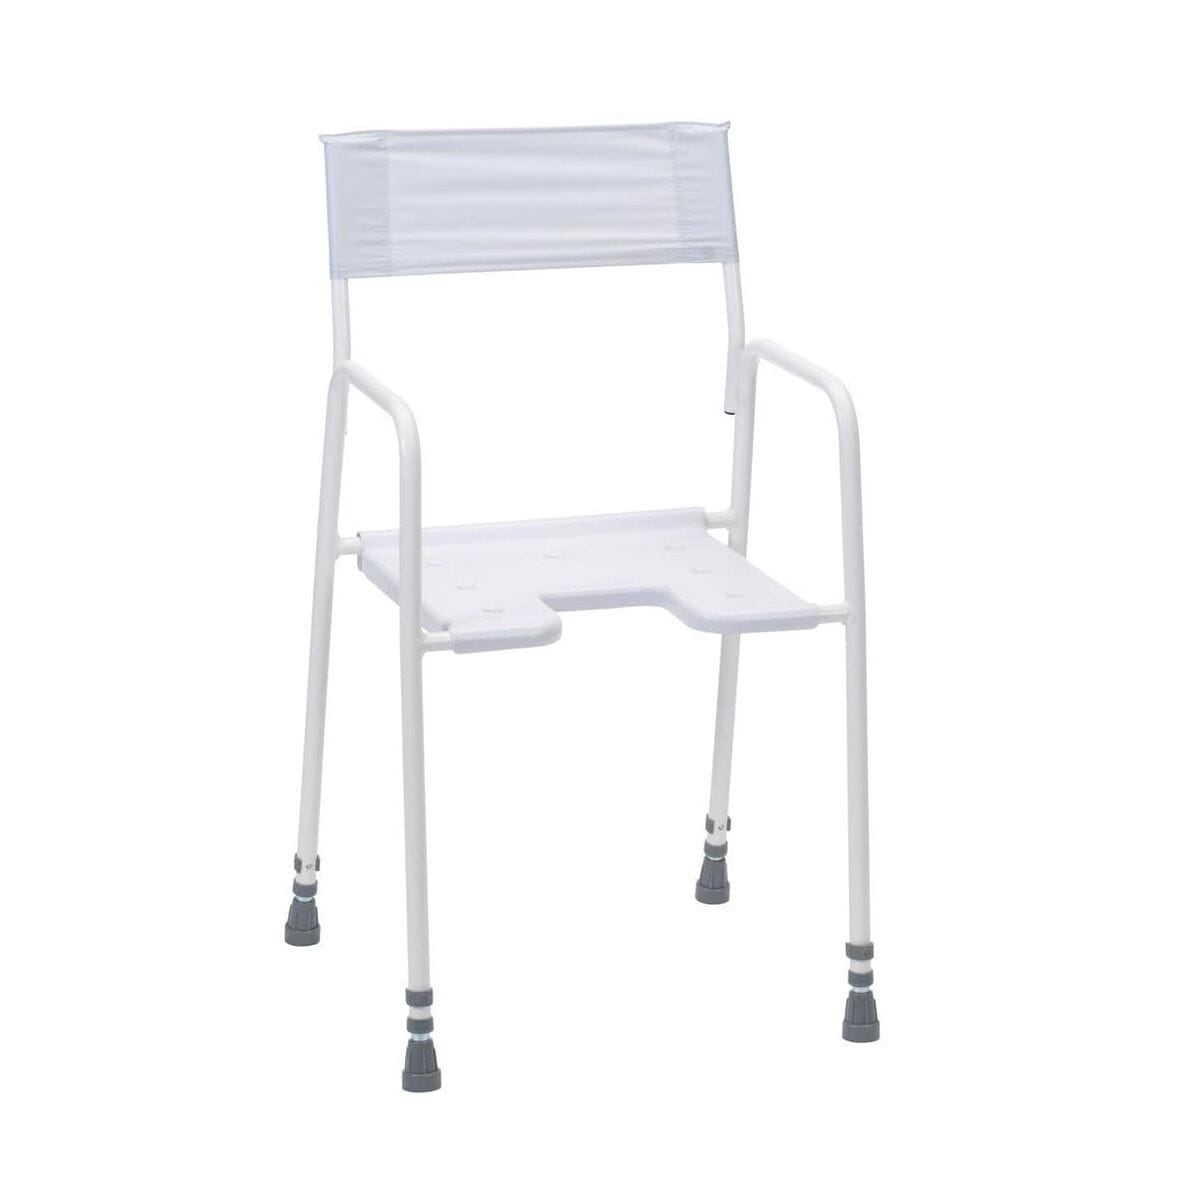 View Bradgate Shower Stool With Back information